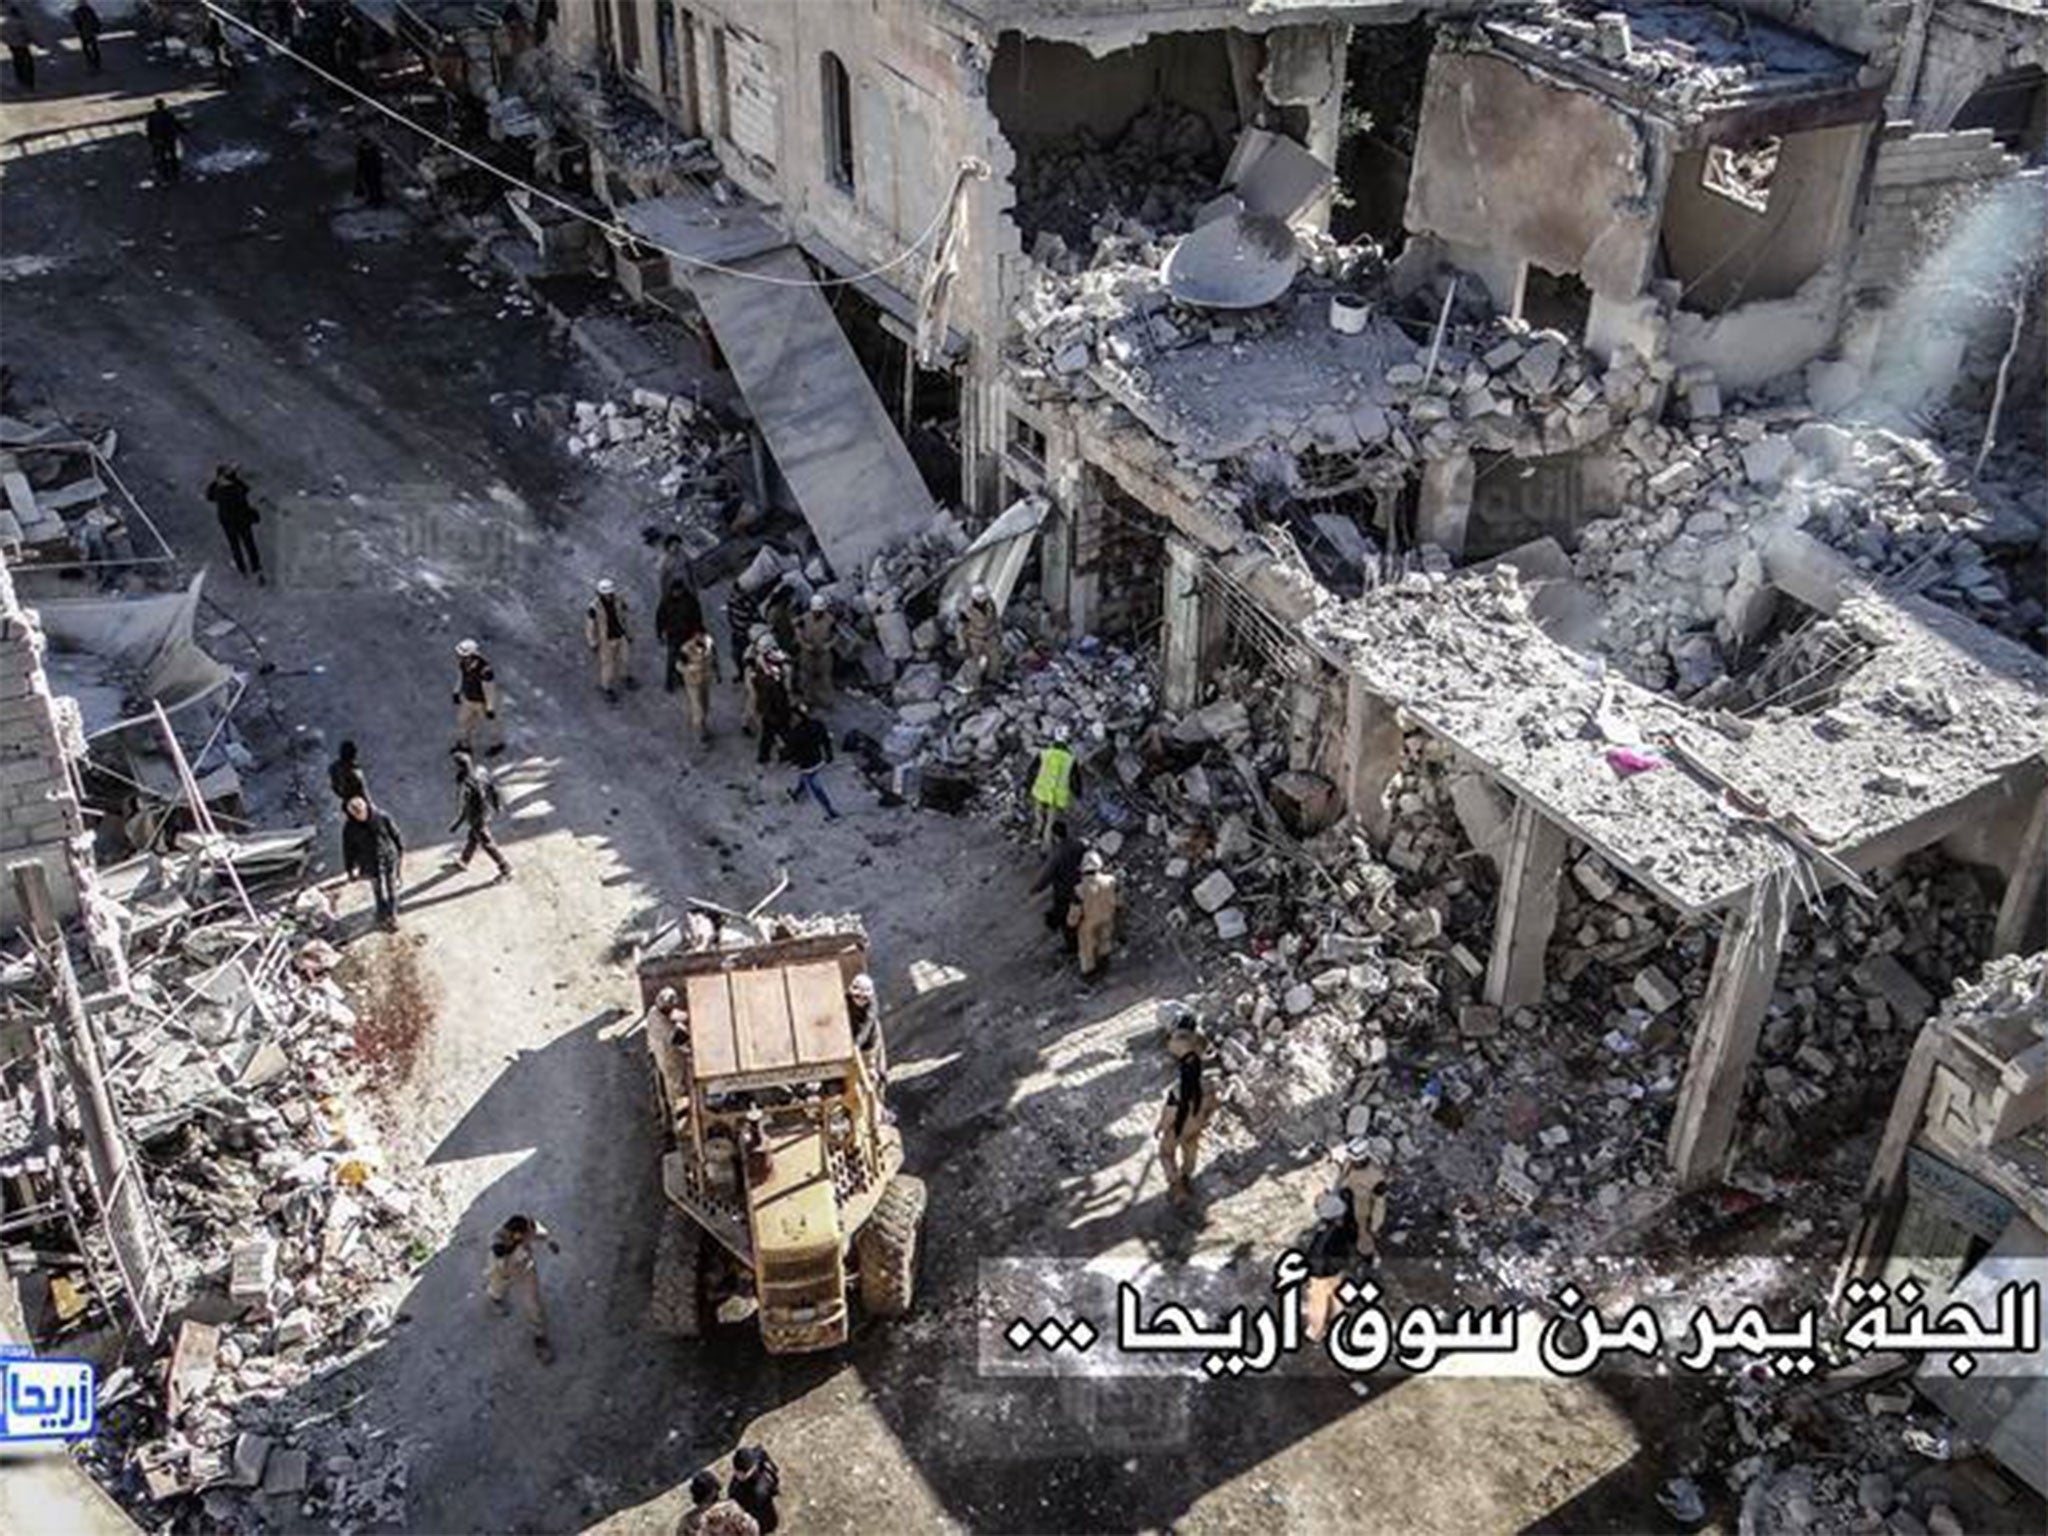 Image featured in Amnesty's Syria report showing damage to Ariha market from a suspected Russian air strike on 29 November 2015